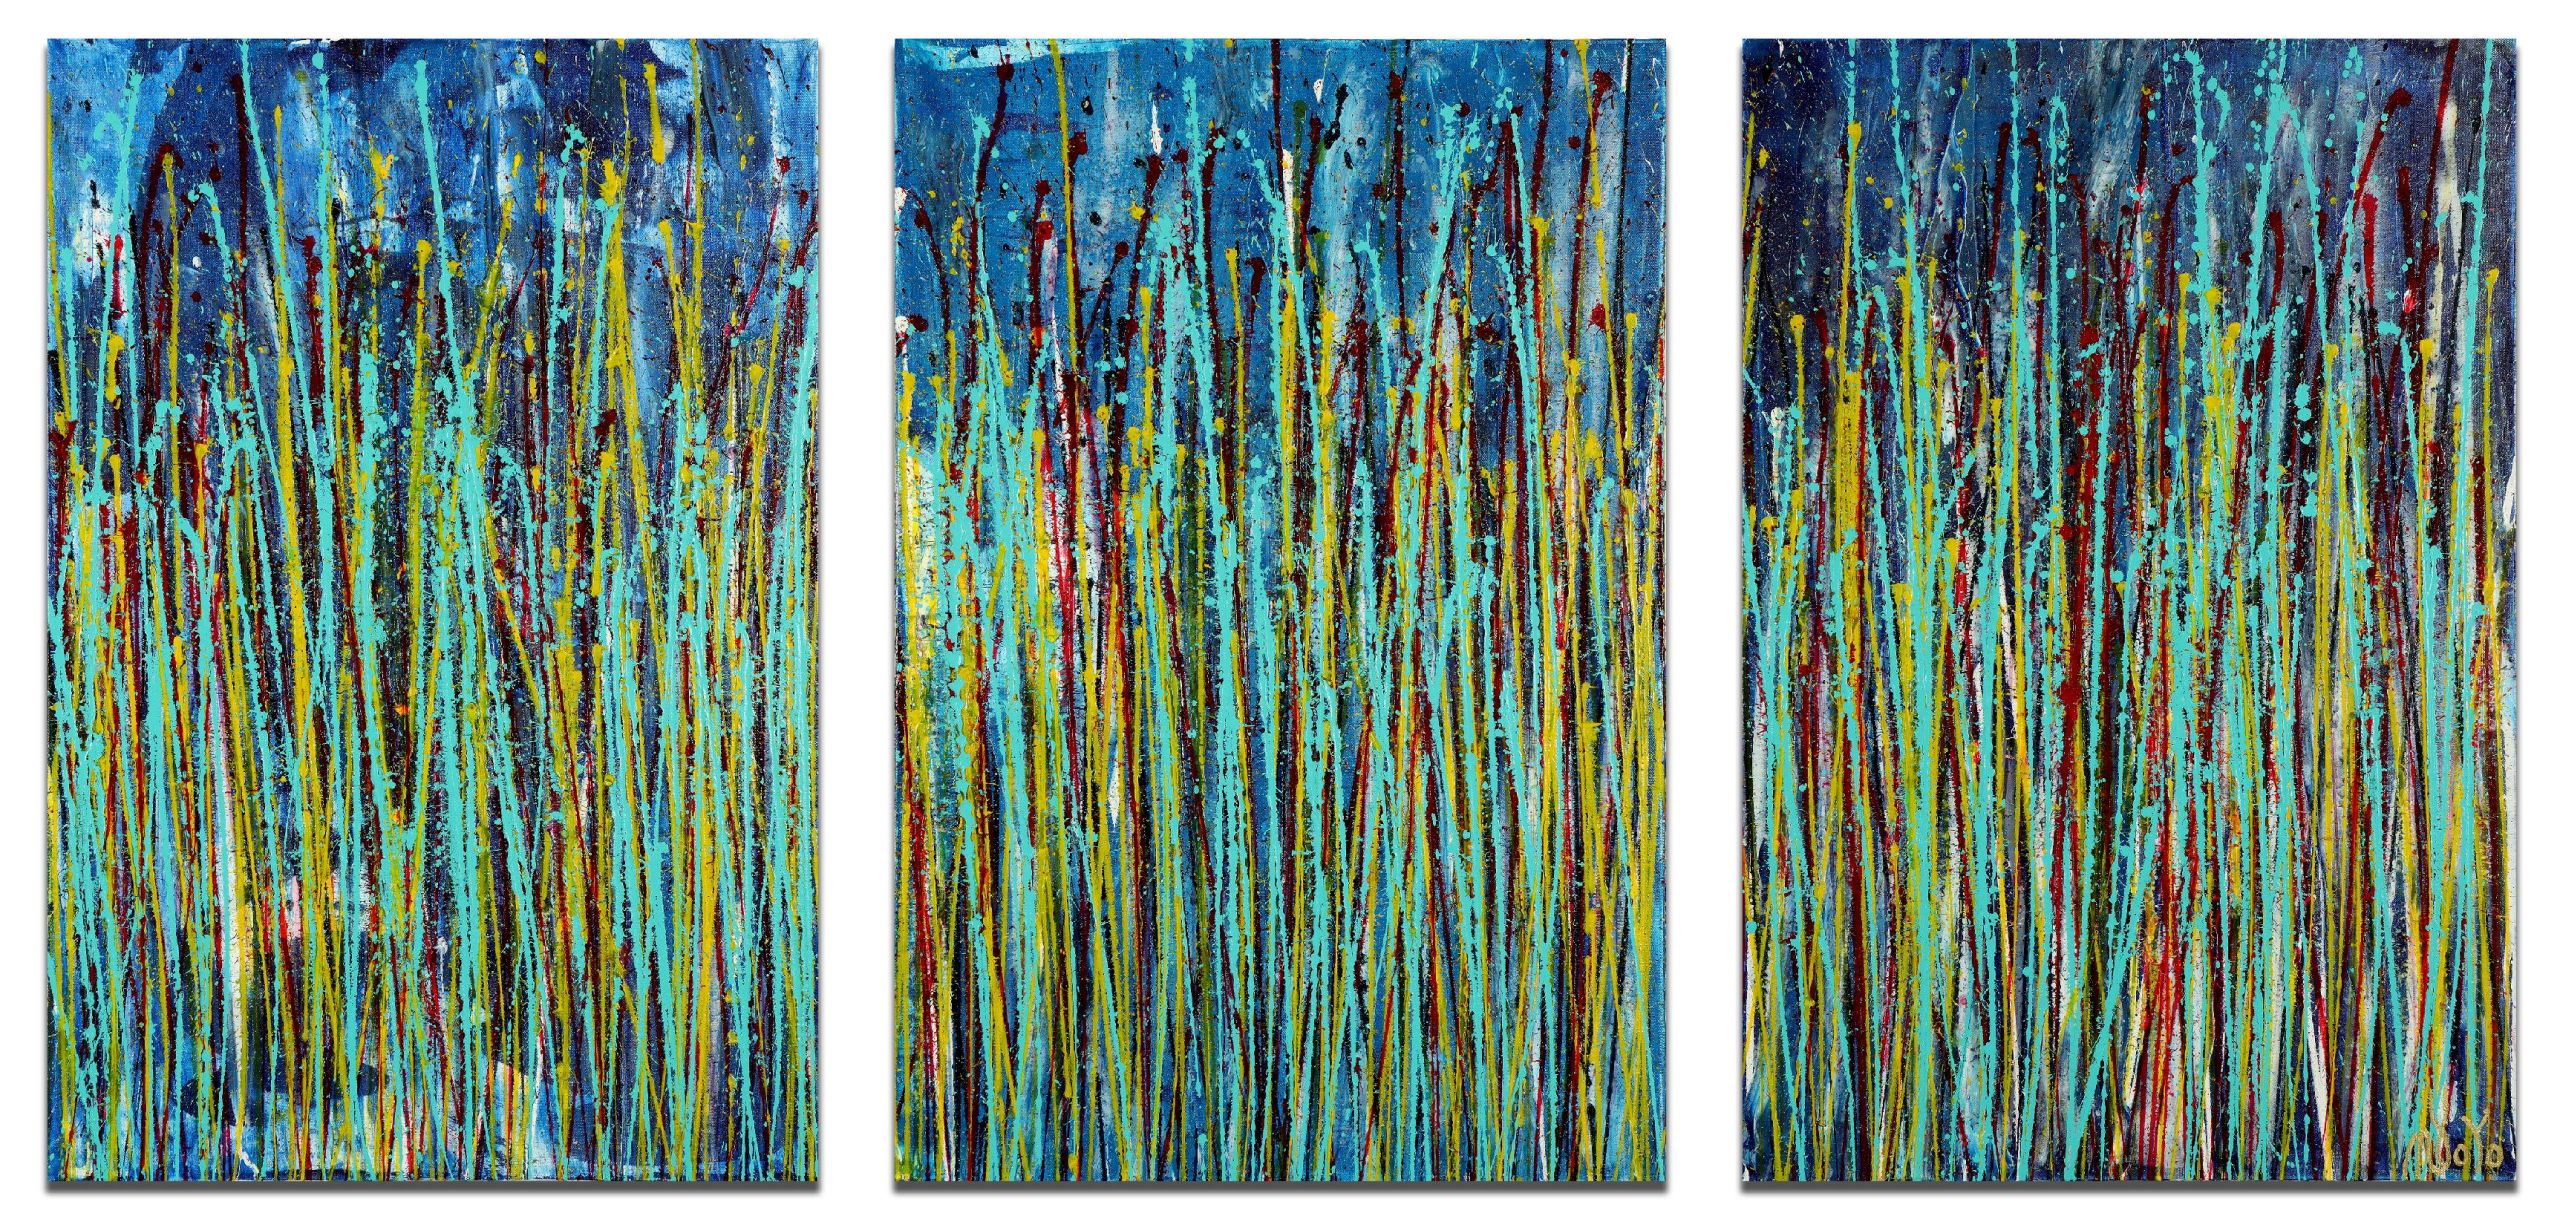 Fugitive Imagination 6 (2022) Triptych / 72x36 inches